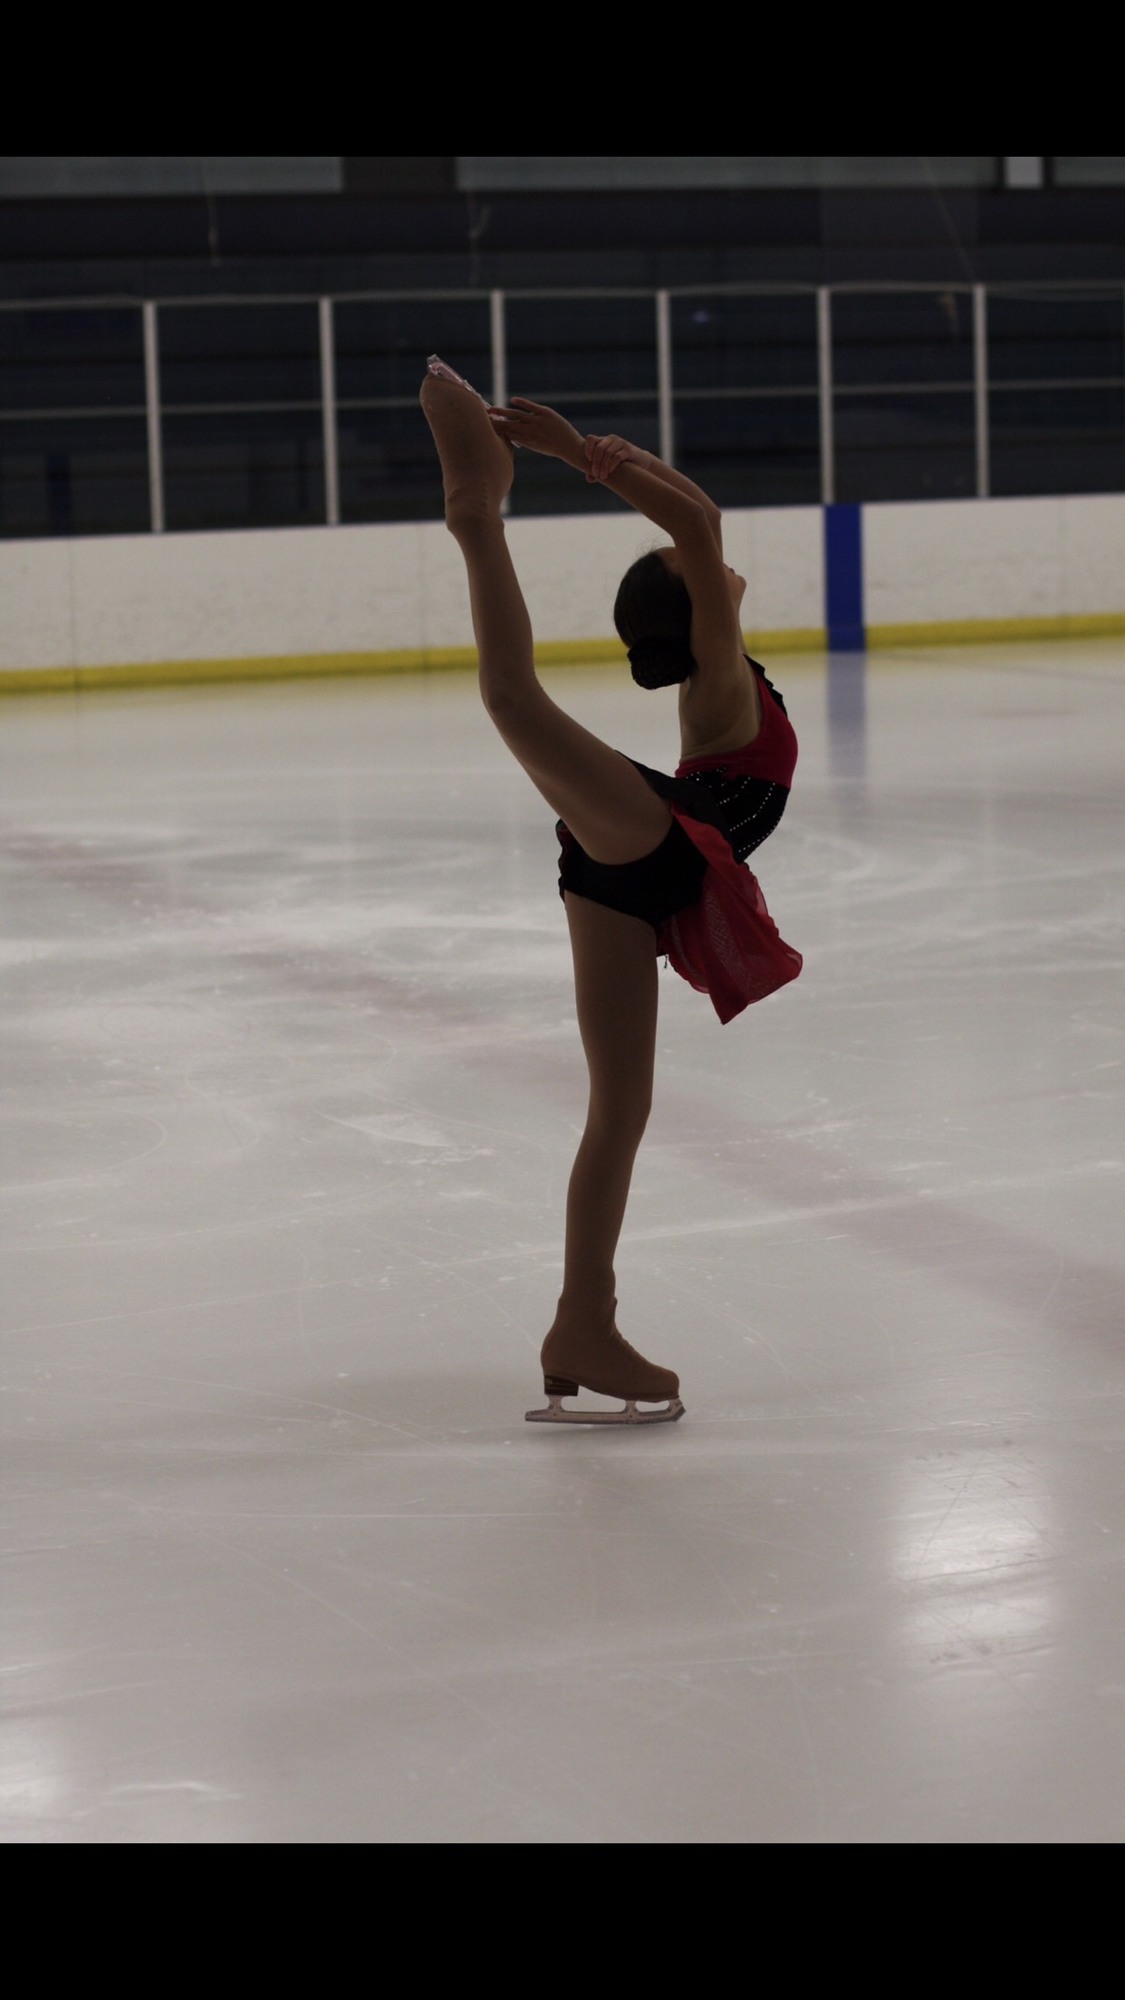 Ava Vandroff practice her figure skating at the Ellenton Ice and Sports Complex. Courtesy photo.